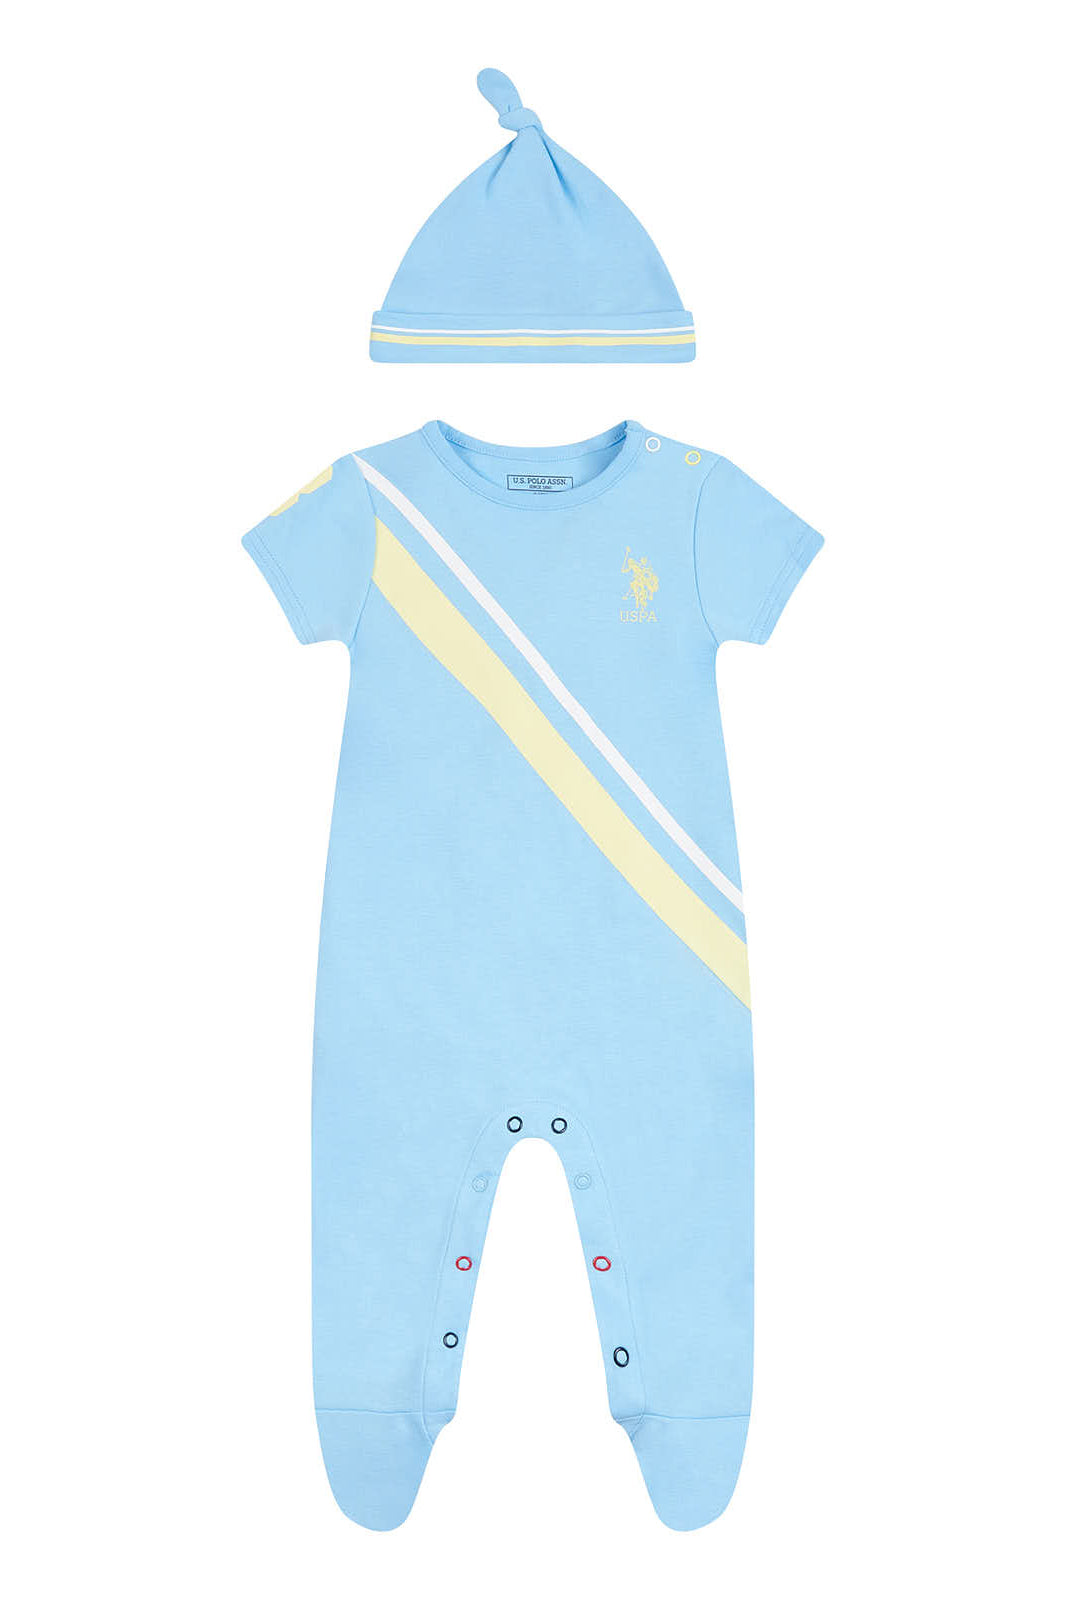 U.S. Polo Assn. Baby Player 3 Sleepsuit in Blue Bell